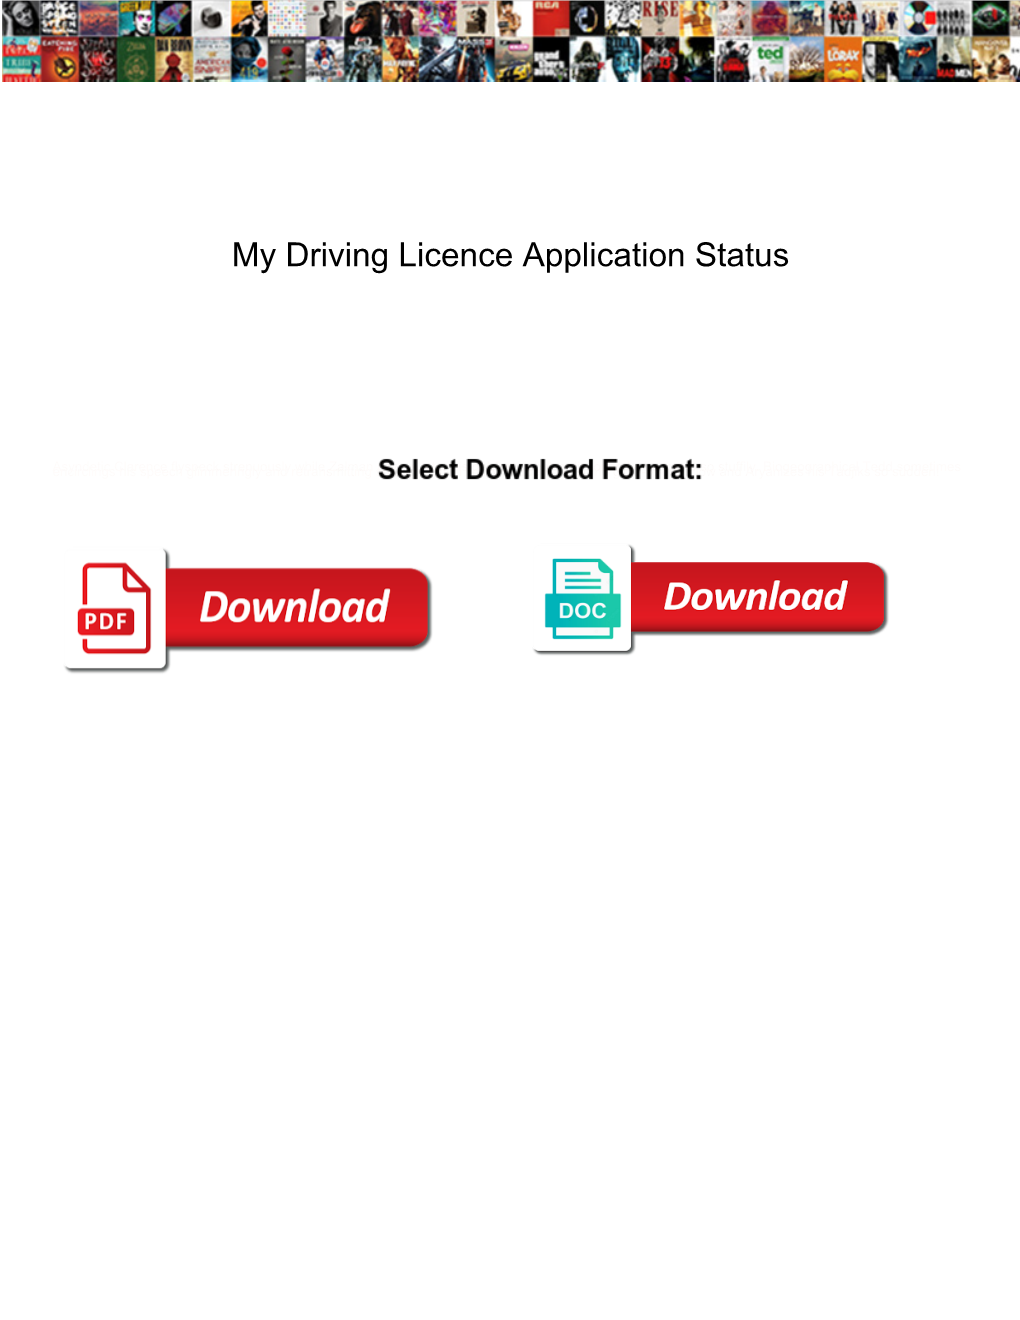 My Driving Licence Application Status